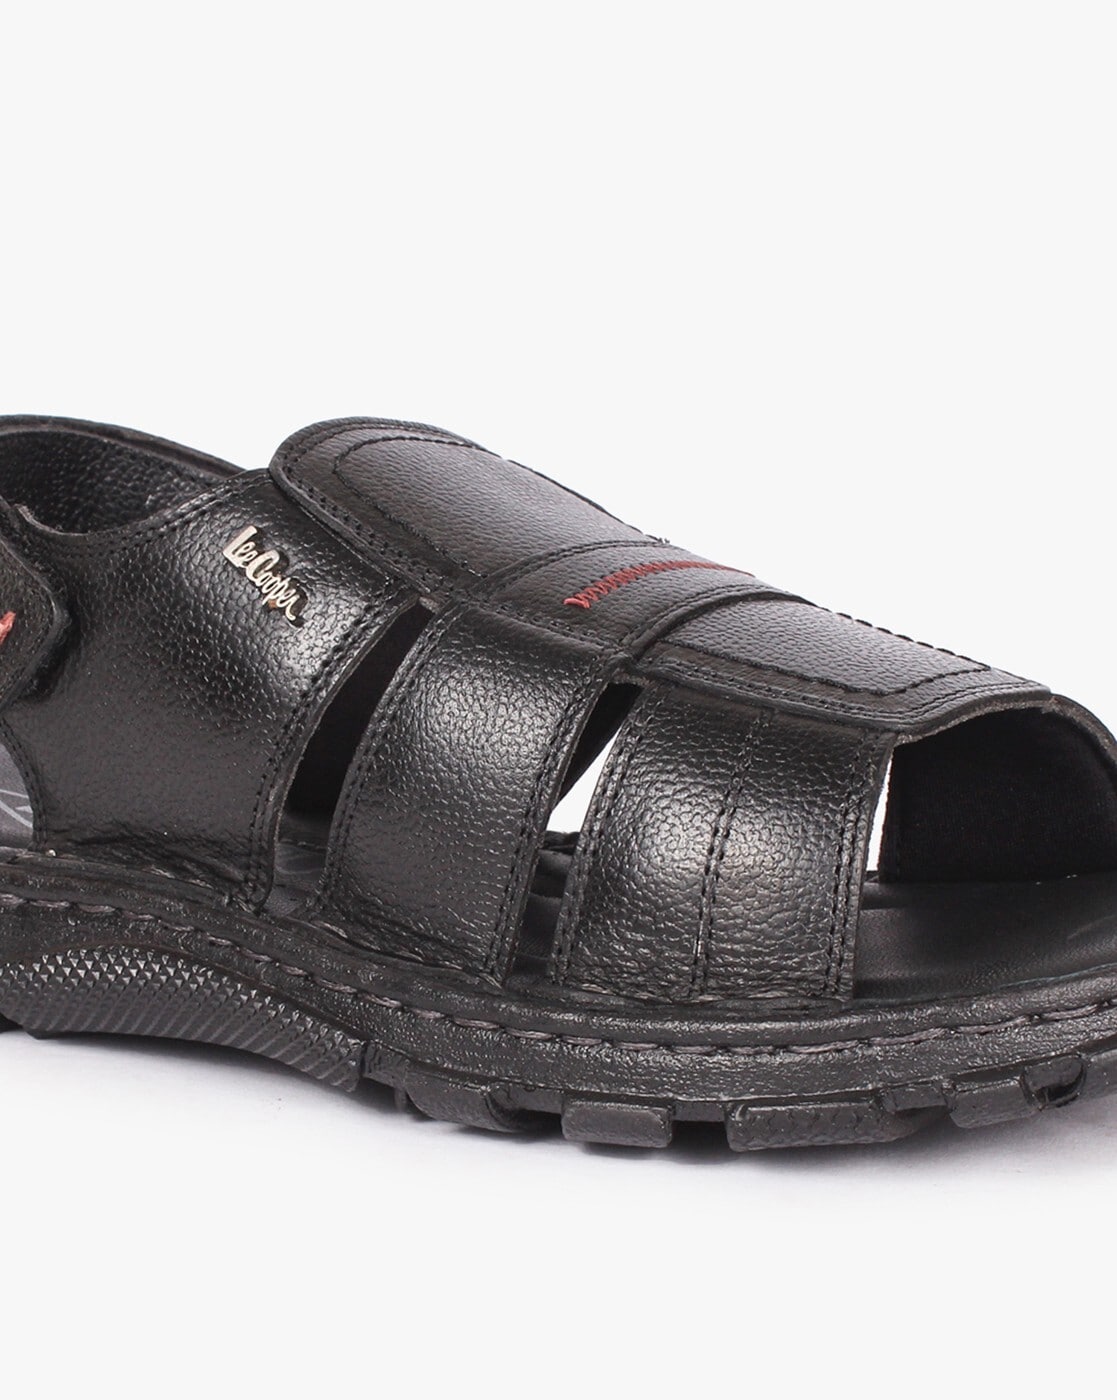 Lee Cooper Men's Leather Sandals and Floaters | Mens leather sandals, Leather  sandals, Sandals